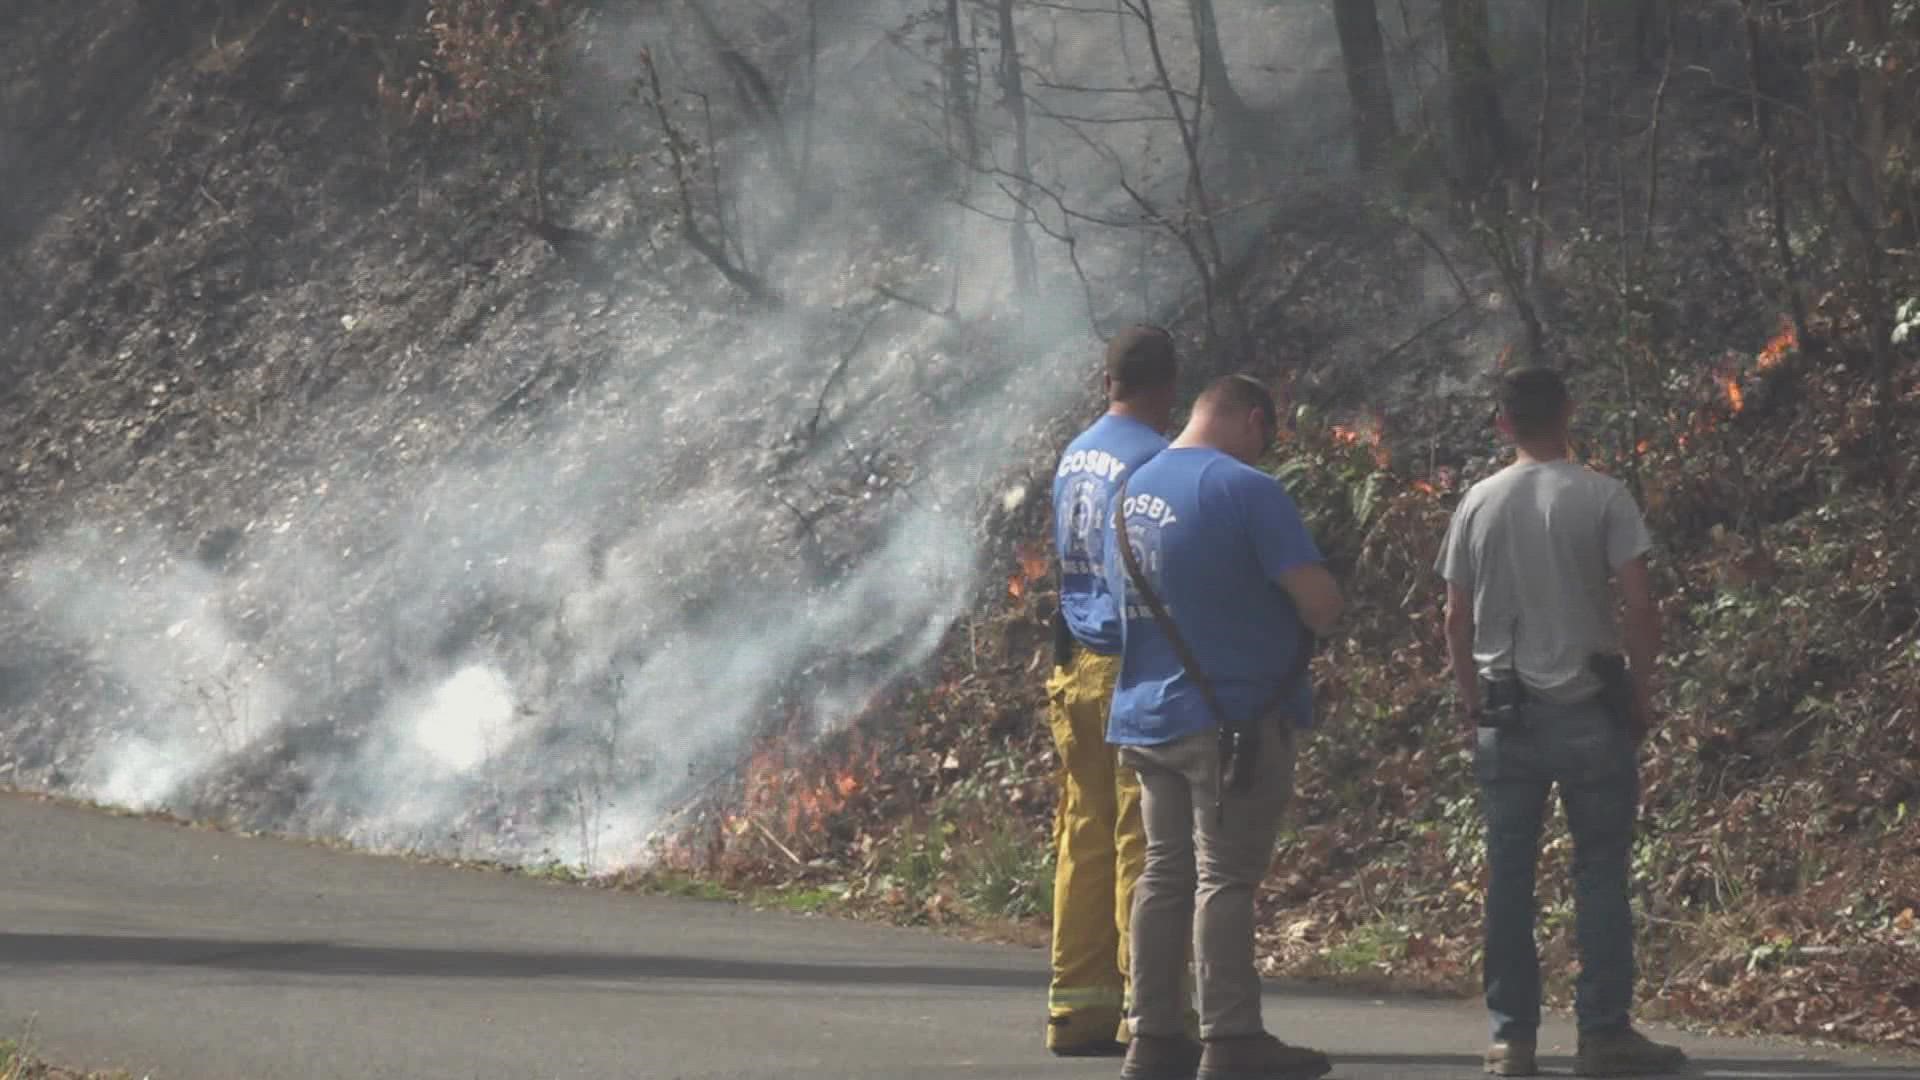 "We continue to receive calls of individuals starting brush fires. Quit burning. You are not the one that has to risk your life to put it out," the CCSO said.